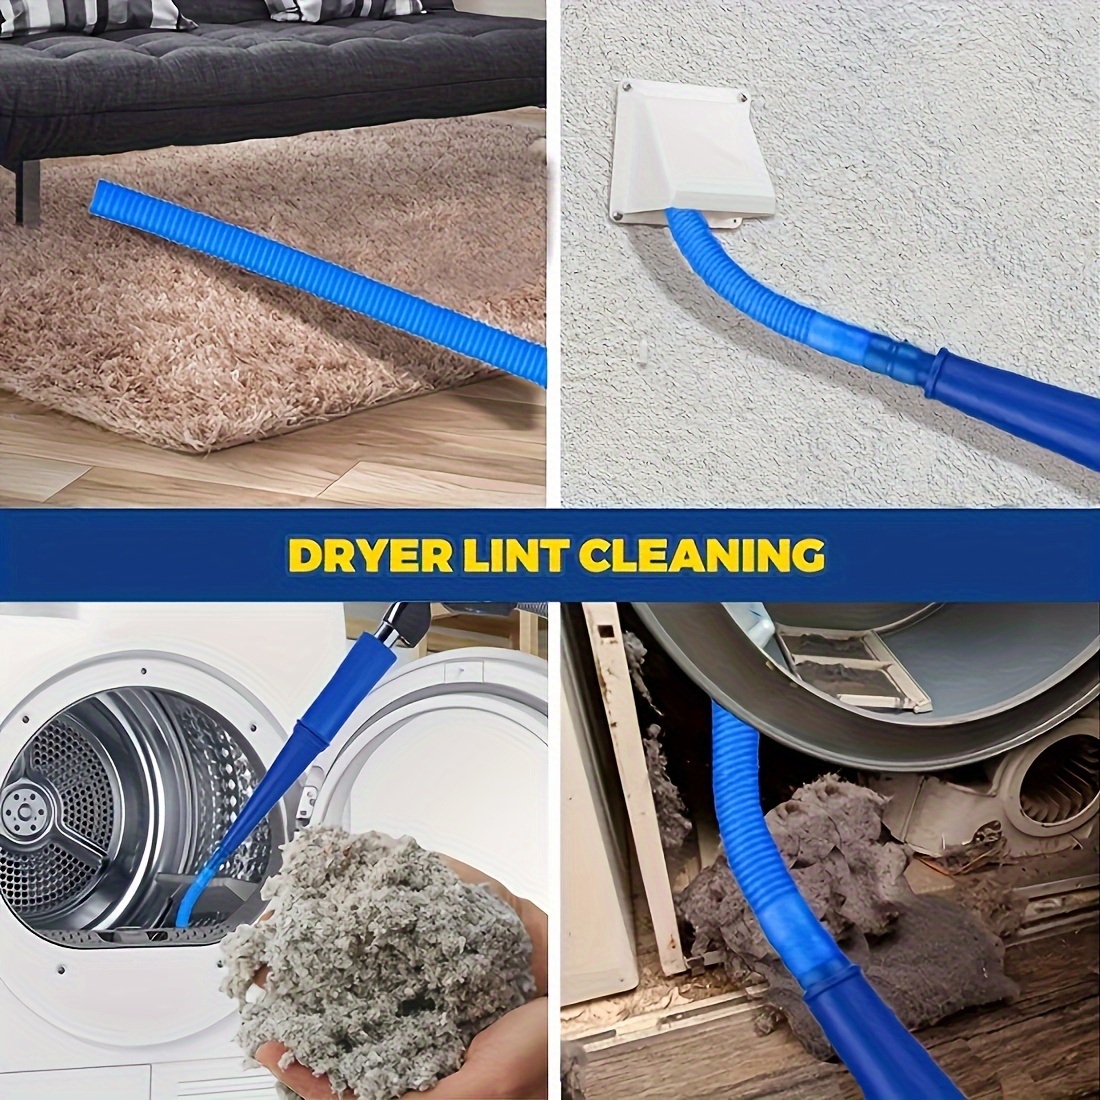 3pcs/set, Dryer Vent Cleaning Kit, Dryer Vent Vacuum Attachment, Bendable  Dryer Lint Removal Tool, Dryer Lint Screen Cleaning Hose, Universal Adapter